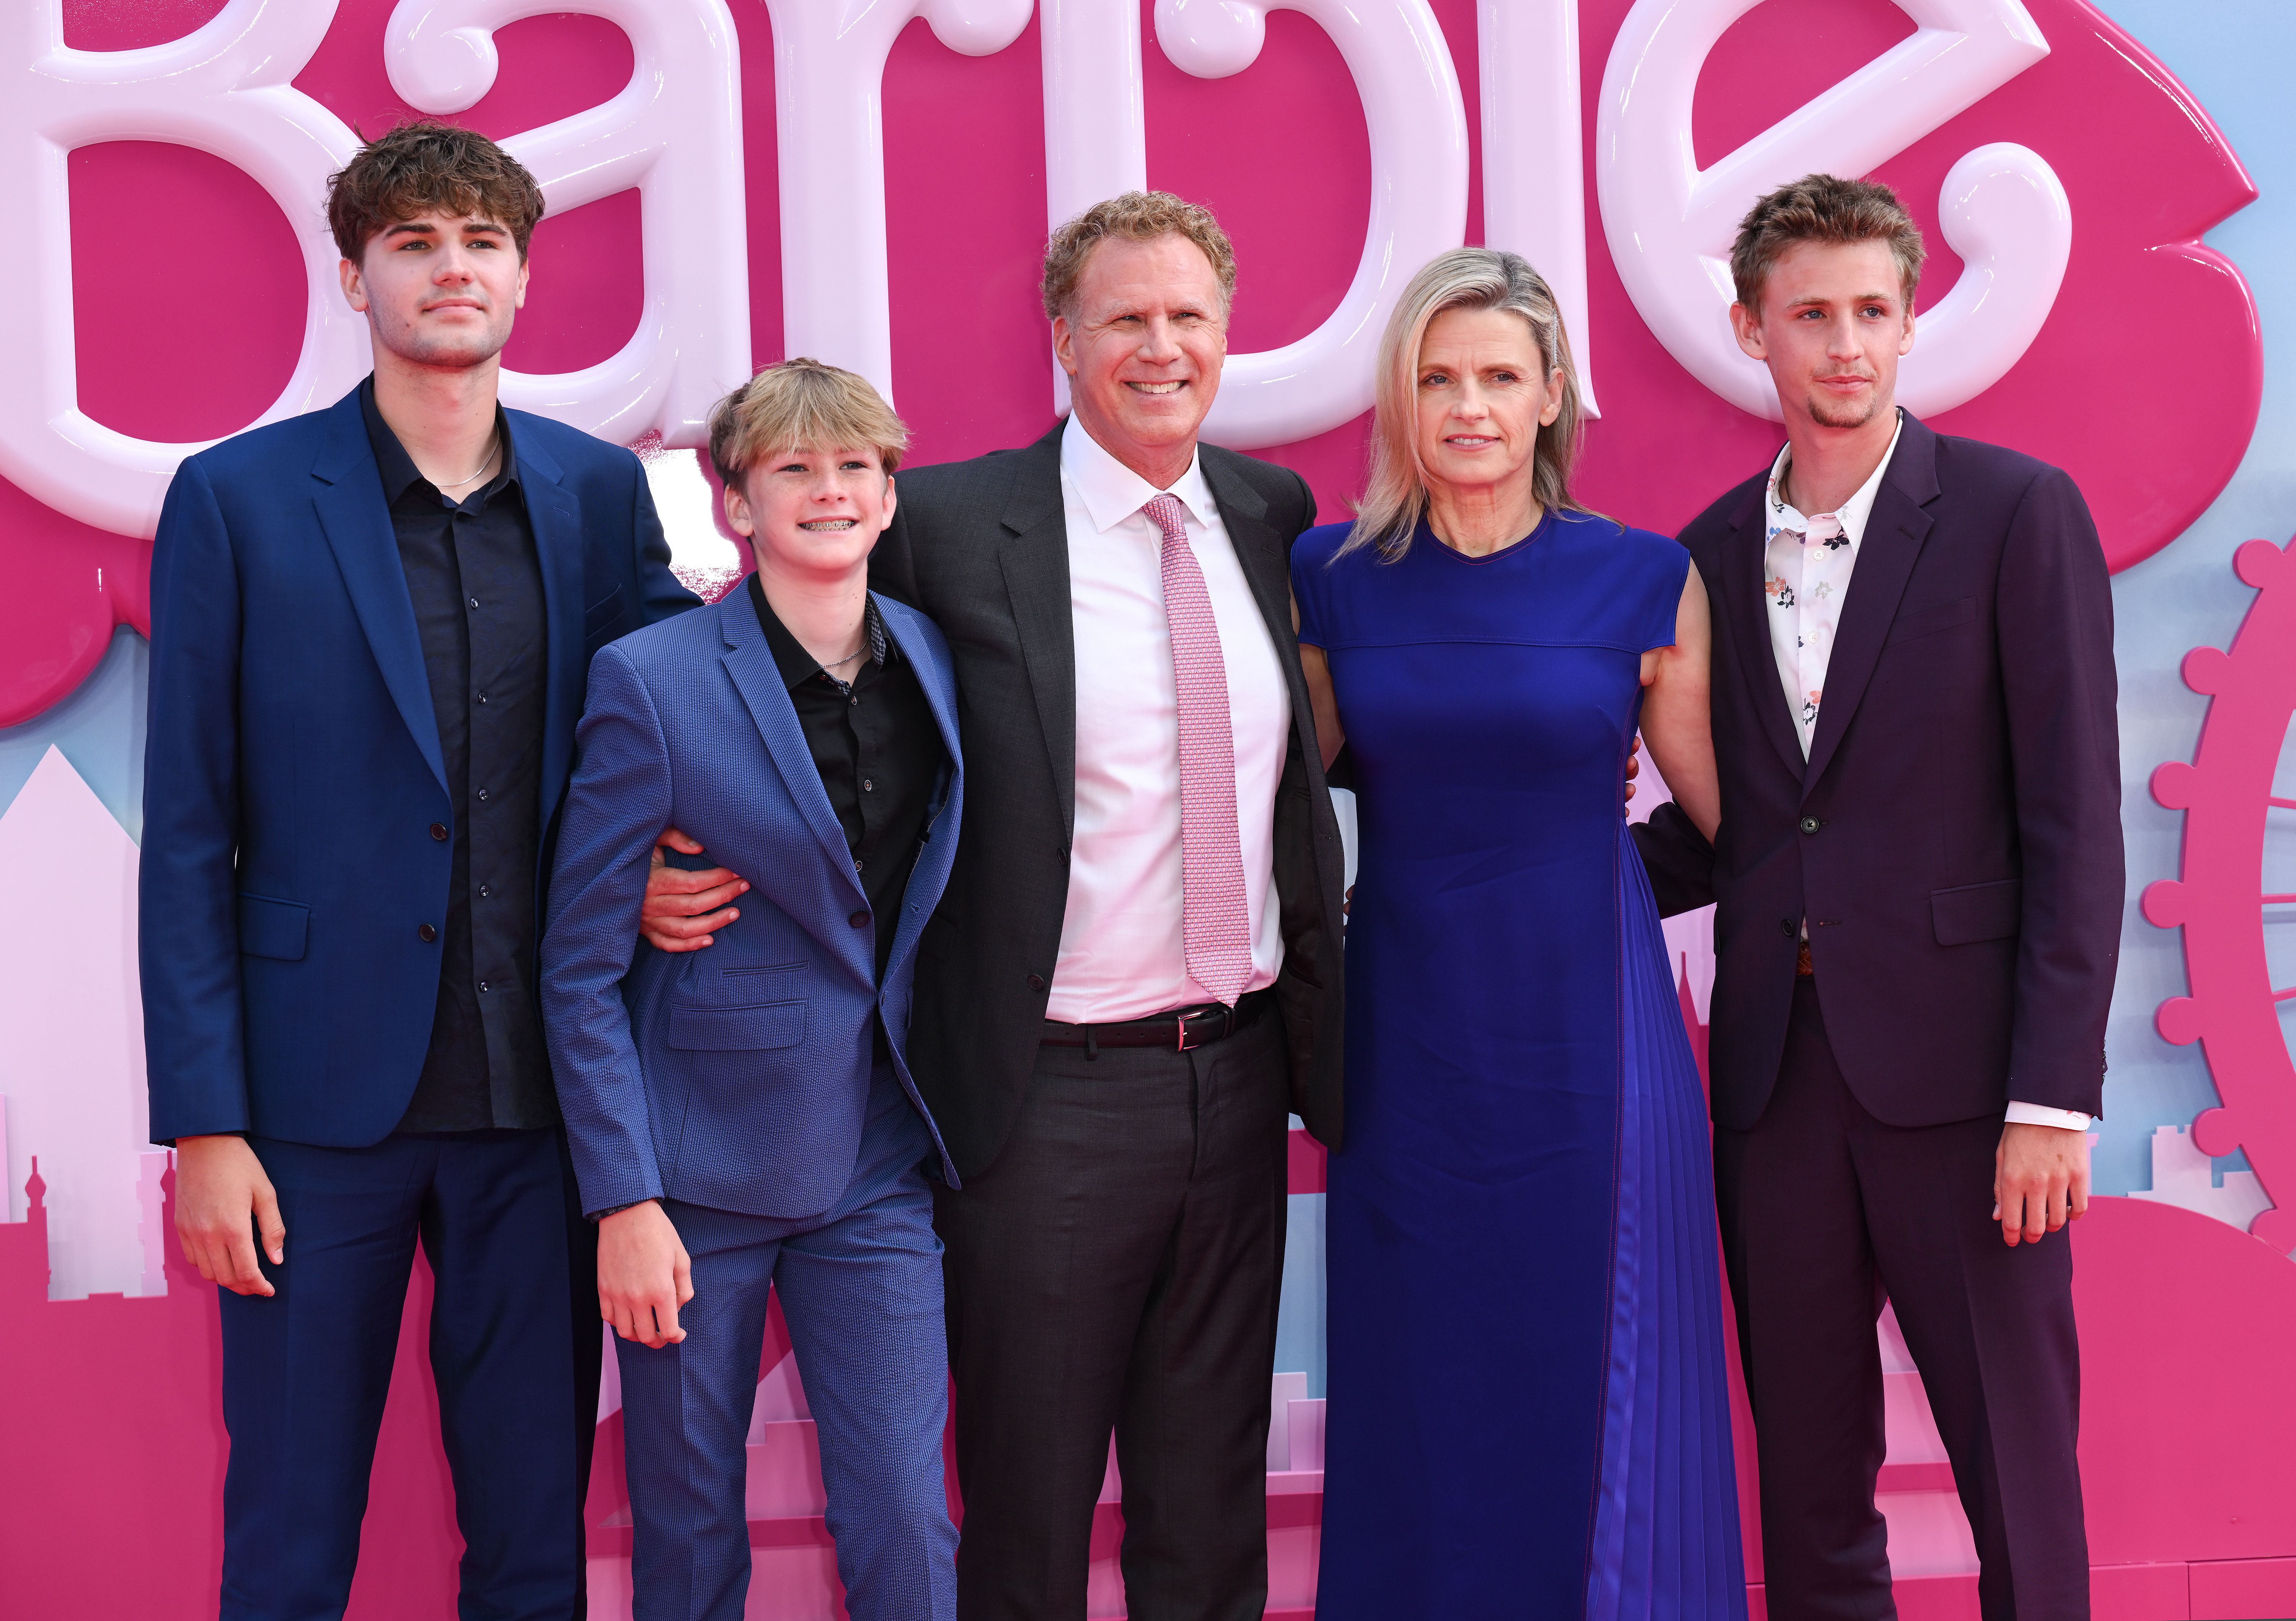 Will Ferrell and Viveca Paulin with their children Mattias, Axel, and Magnus at the "Barbie" premiere in London, 2023. | Source: Getty Images